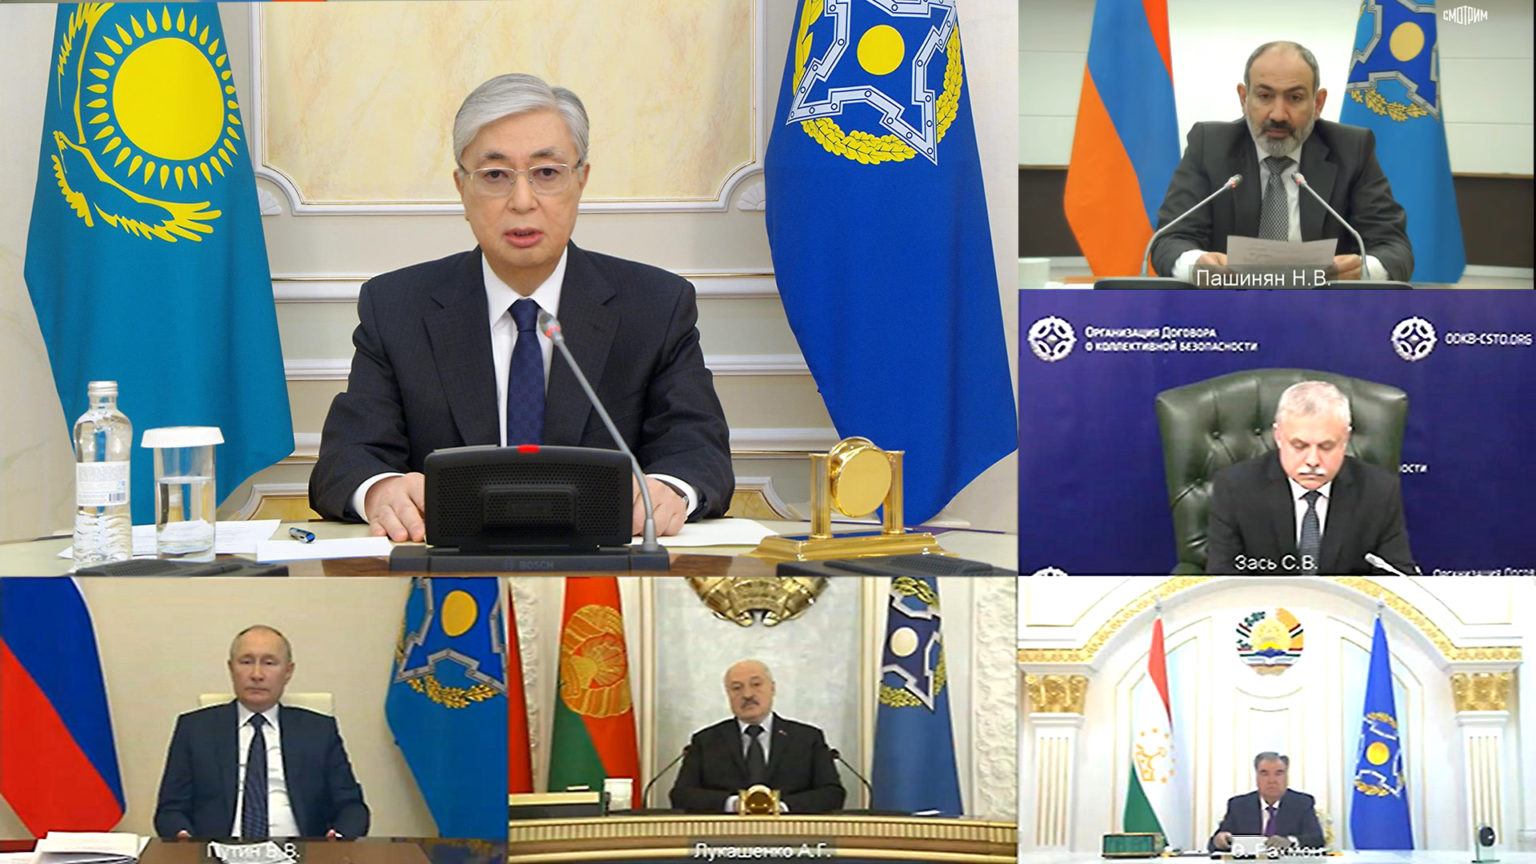 Extraordinary Session of the CSTO Collective Security Council, January 10, 2022 (Photo: Official website of the President of the Republic of Kazakhstan)